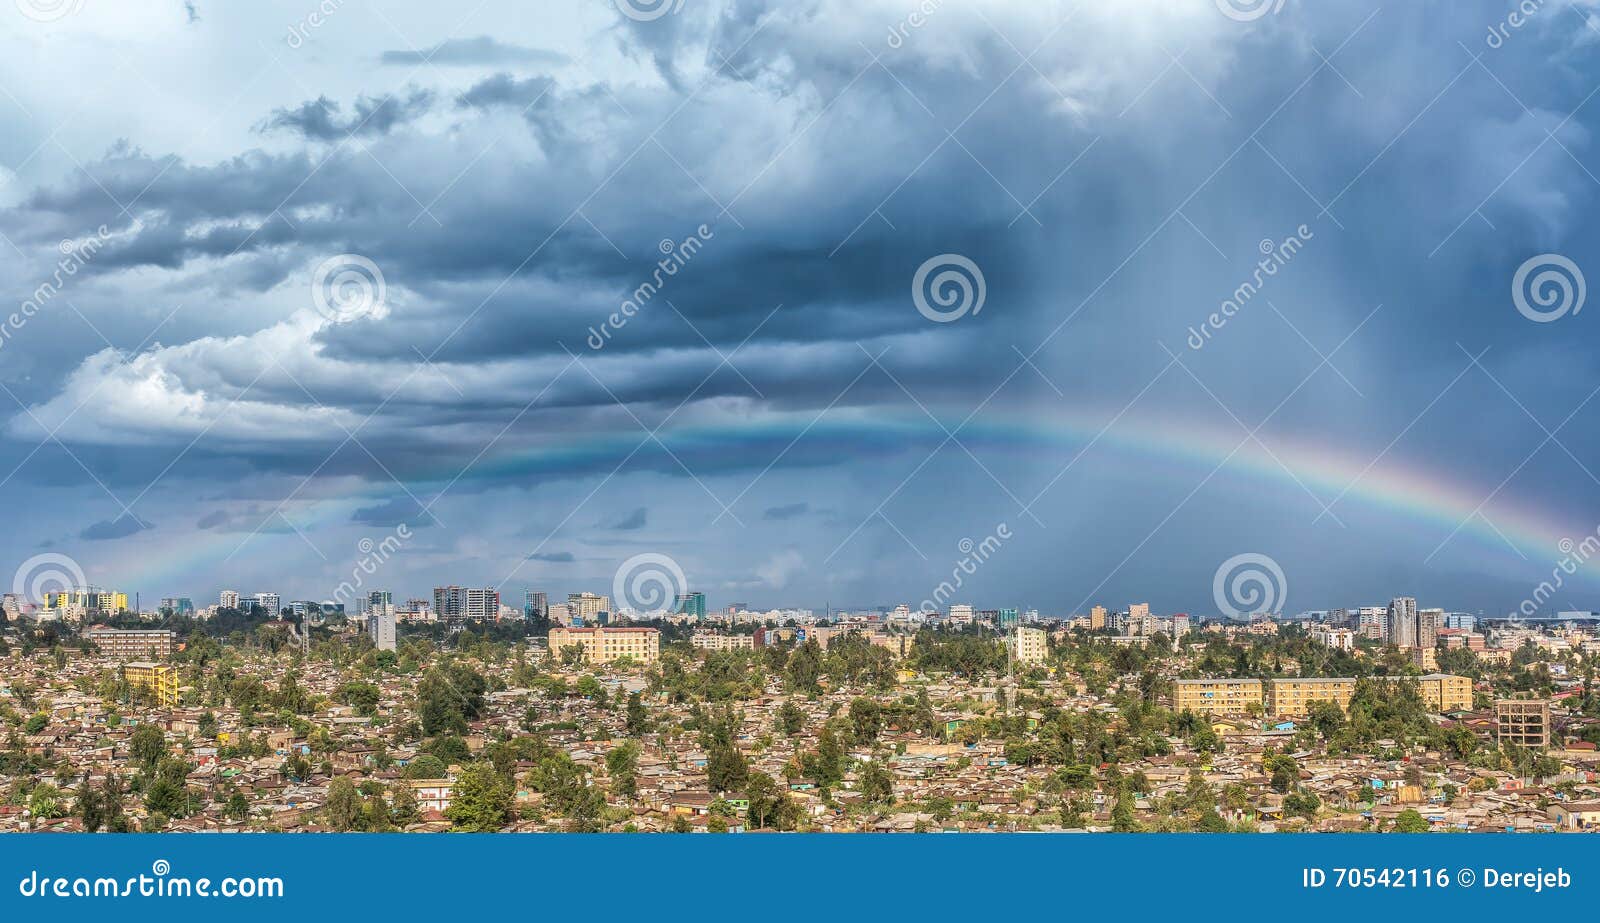 rainbow over the city of addis ababa